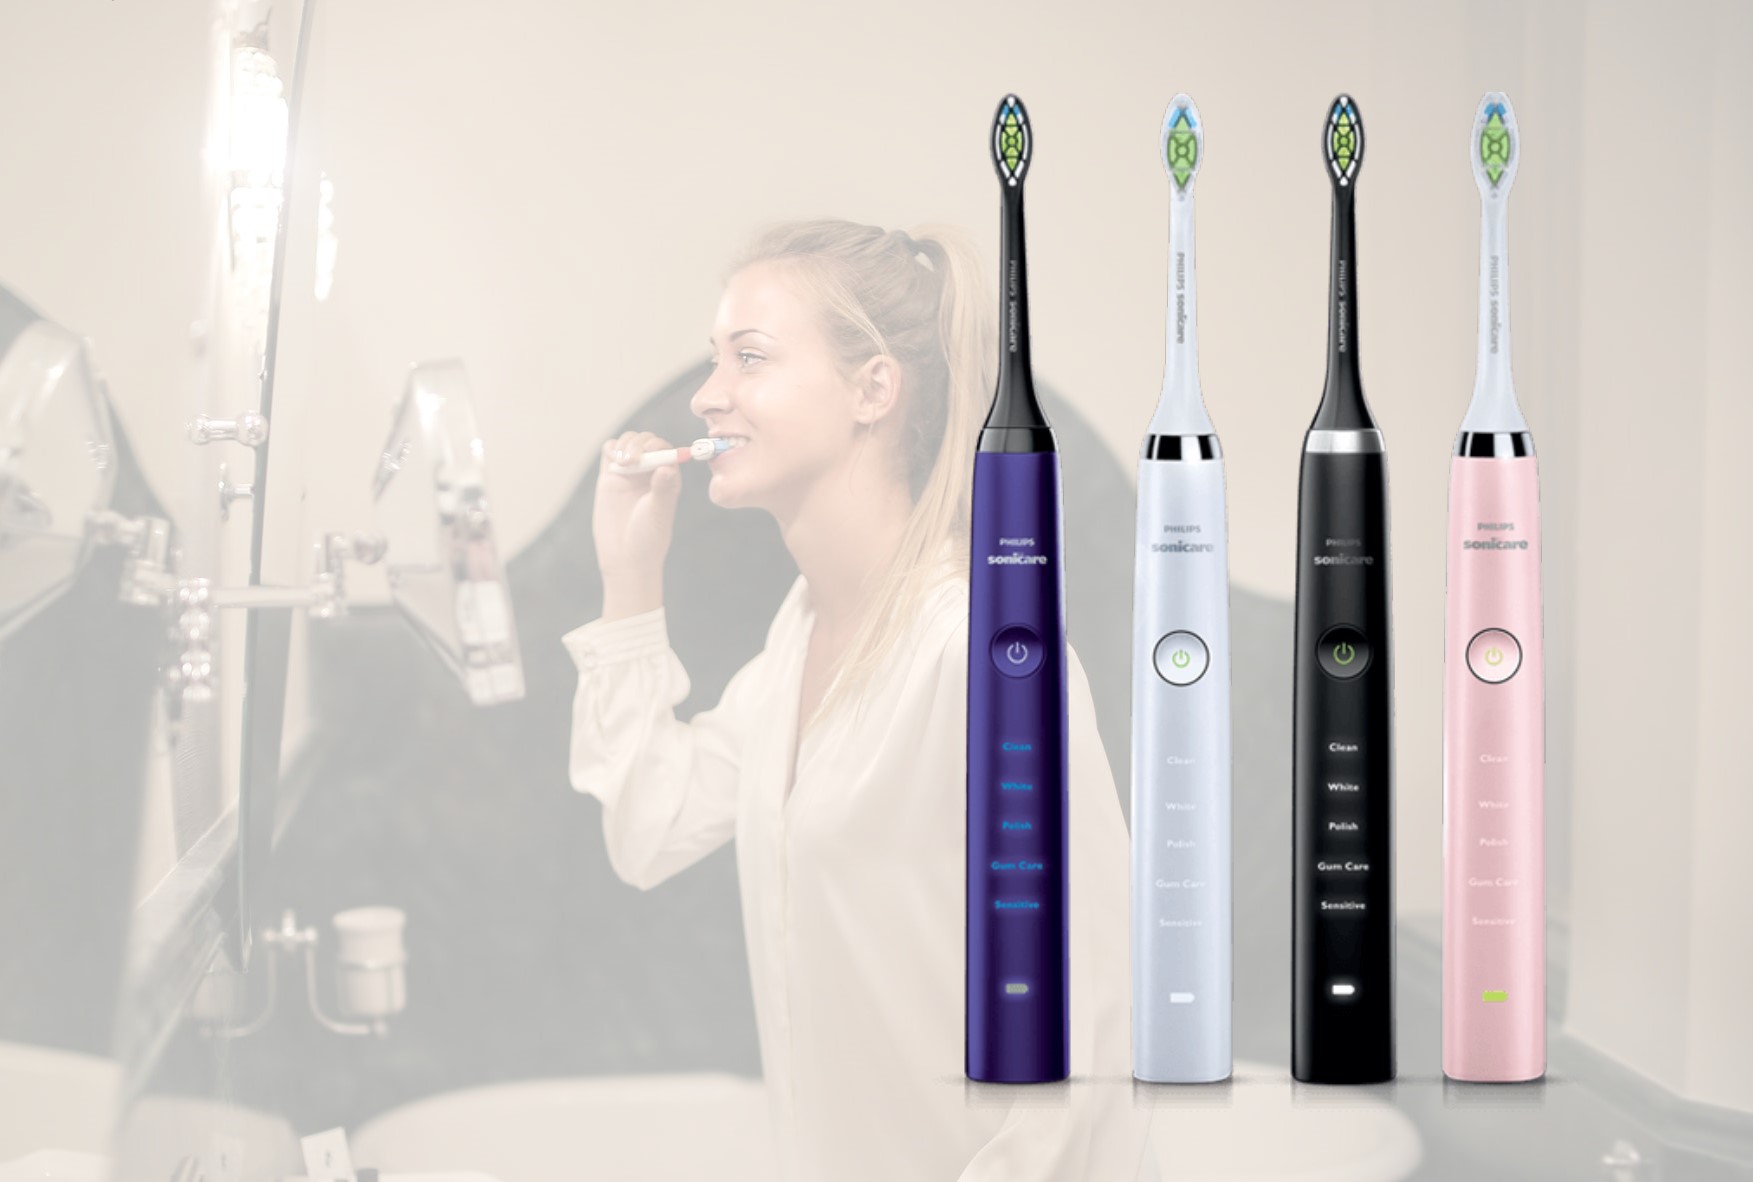 best sonicare toothbrush